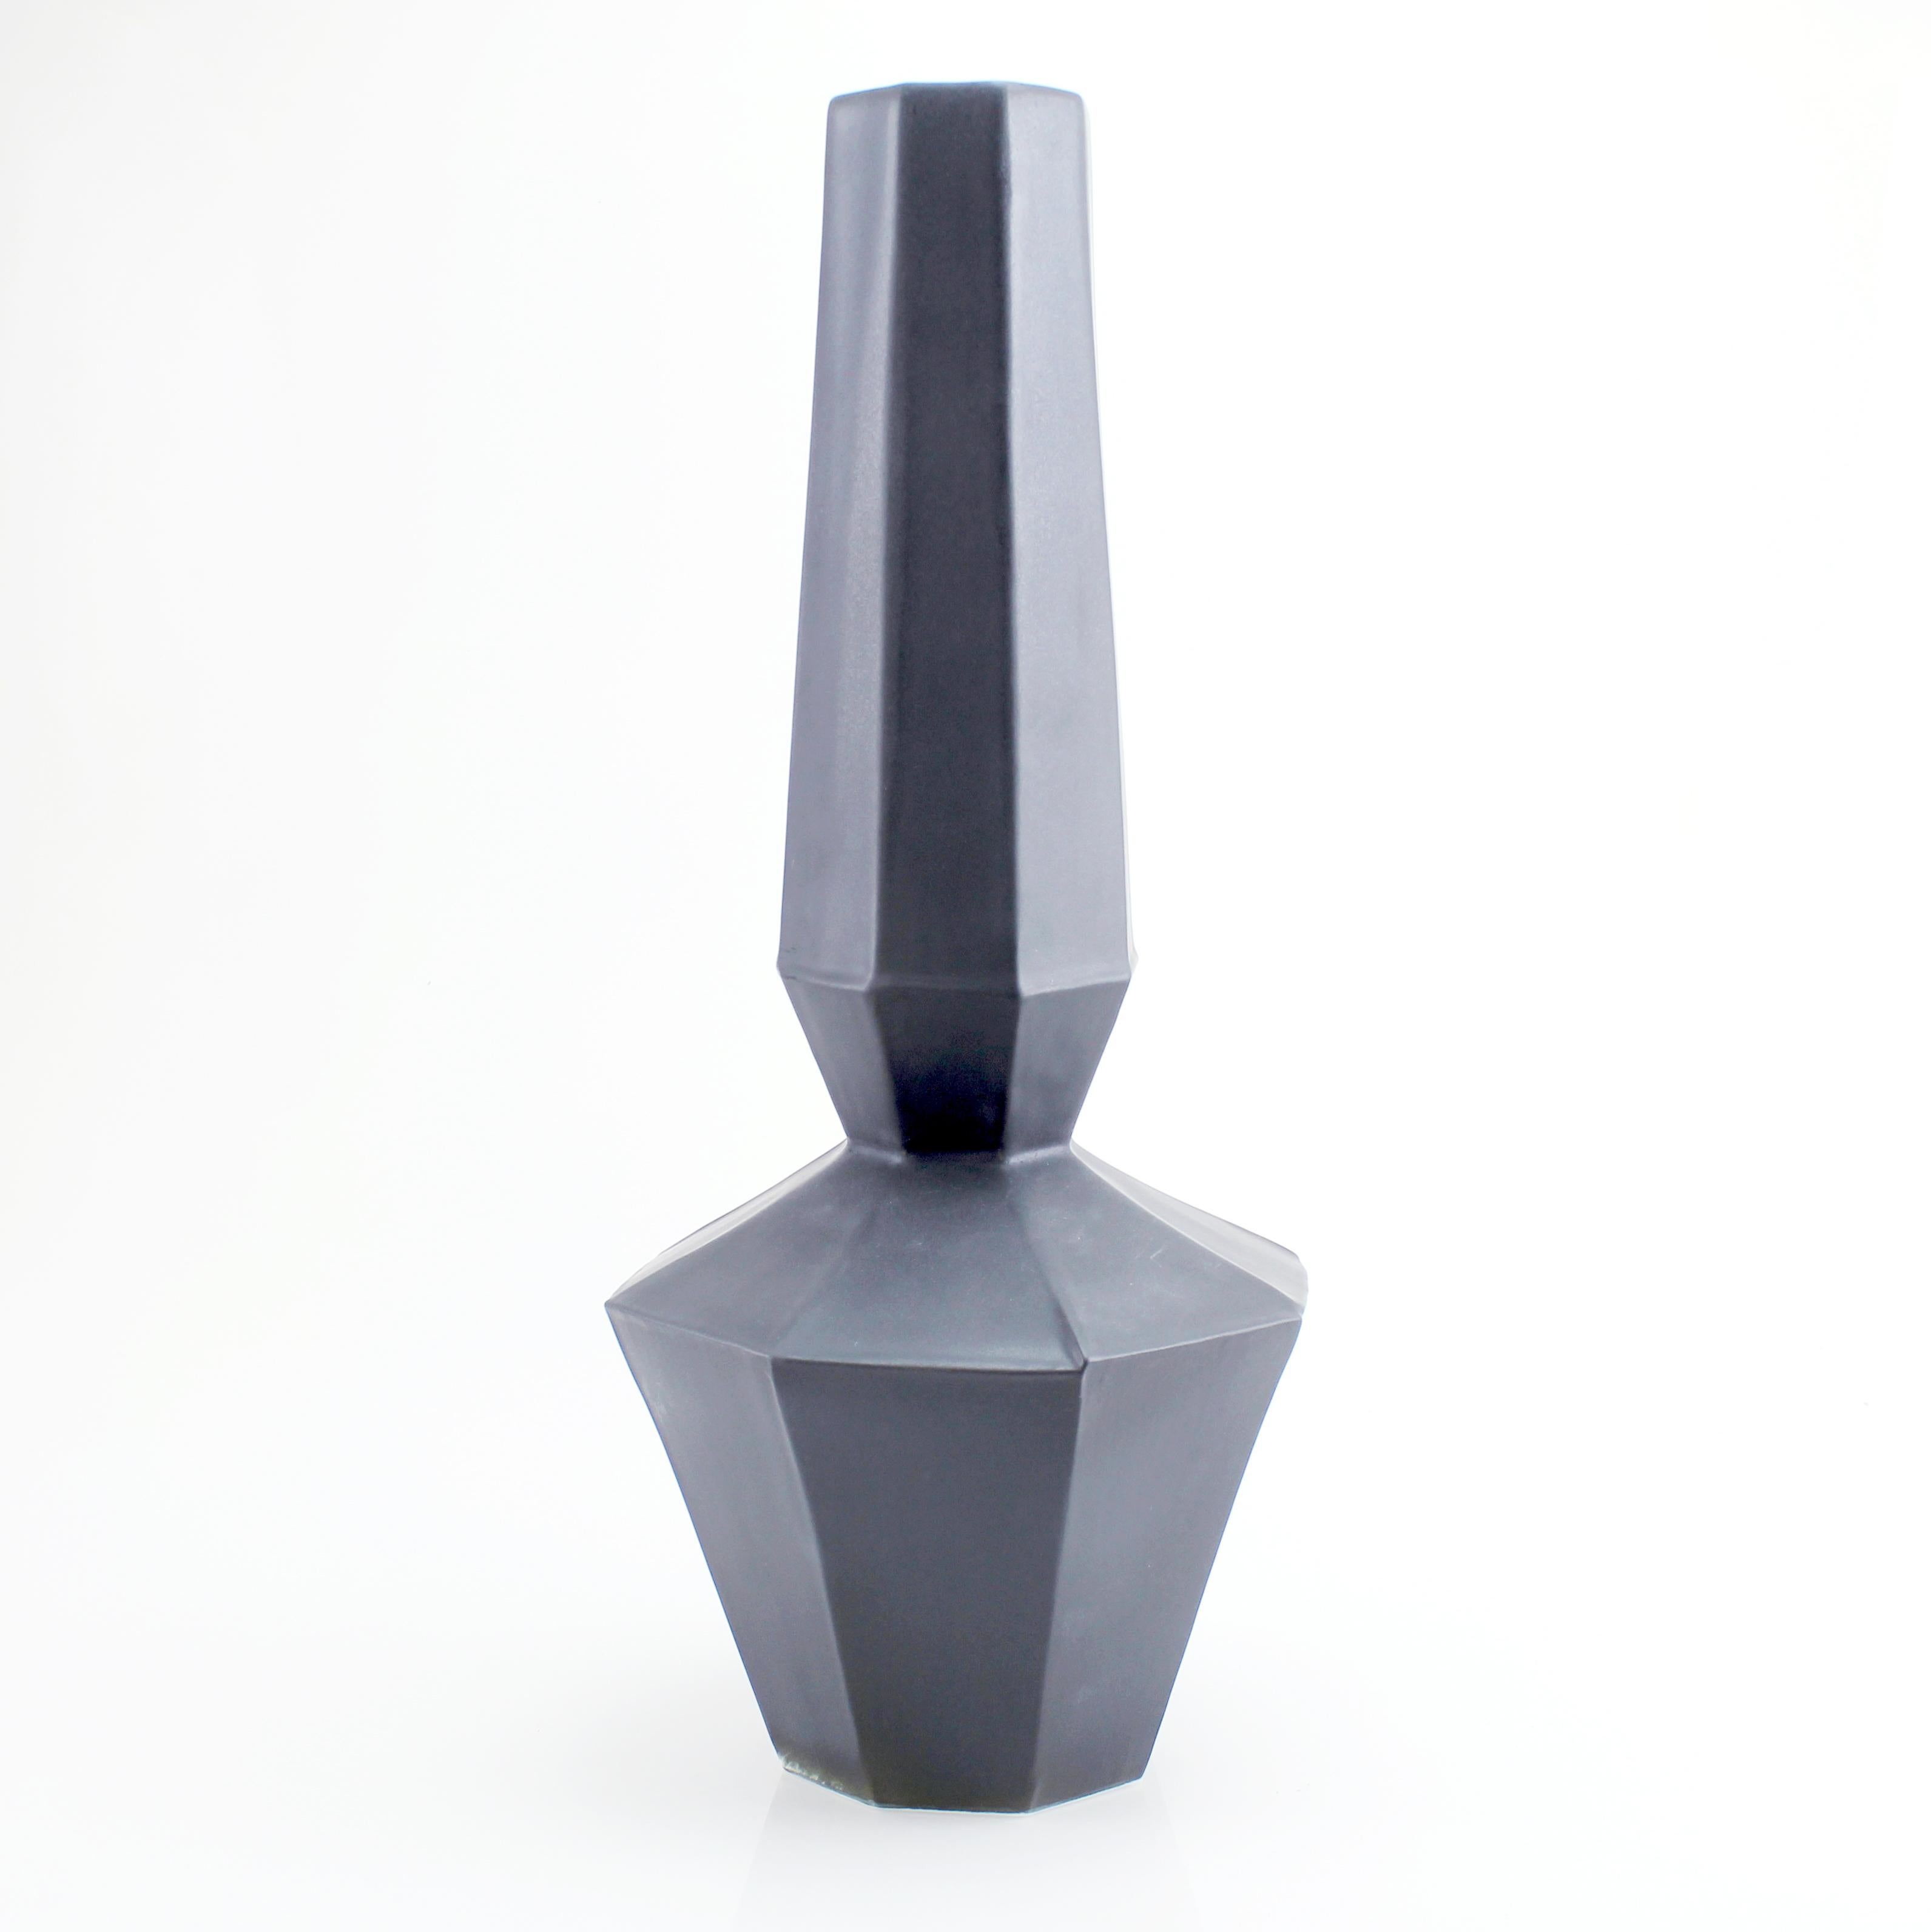 The clean, modern design of the Geometric statement vase offers an updated, elegant look to your room with a Mid-Century Modern feel. This one of a kind piece features a soft matte black glaze. Add a large arrangement of fresh flowers for an